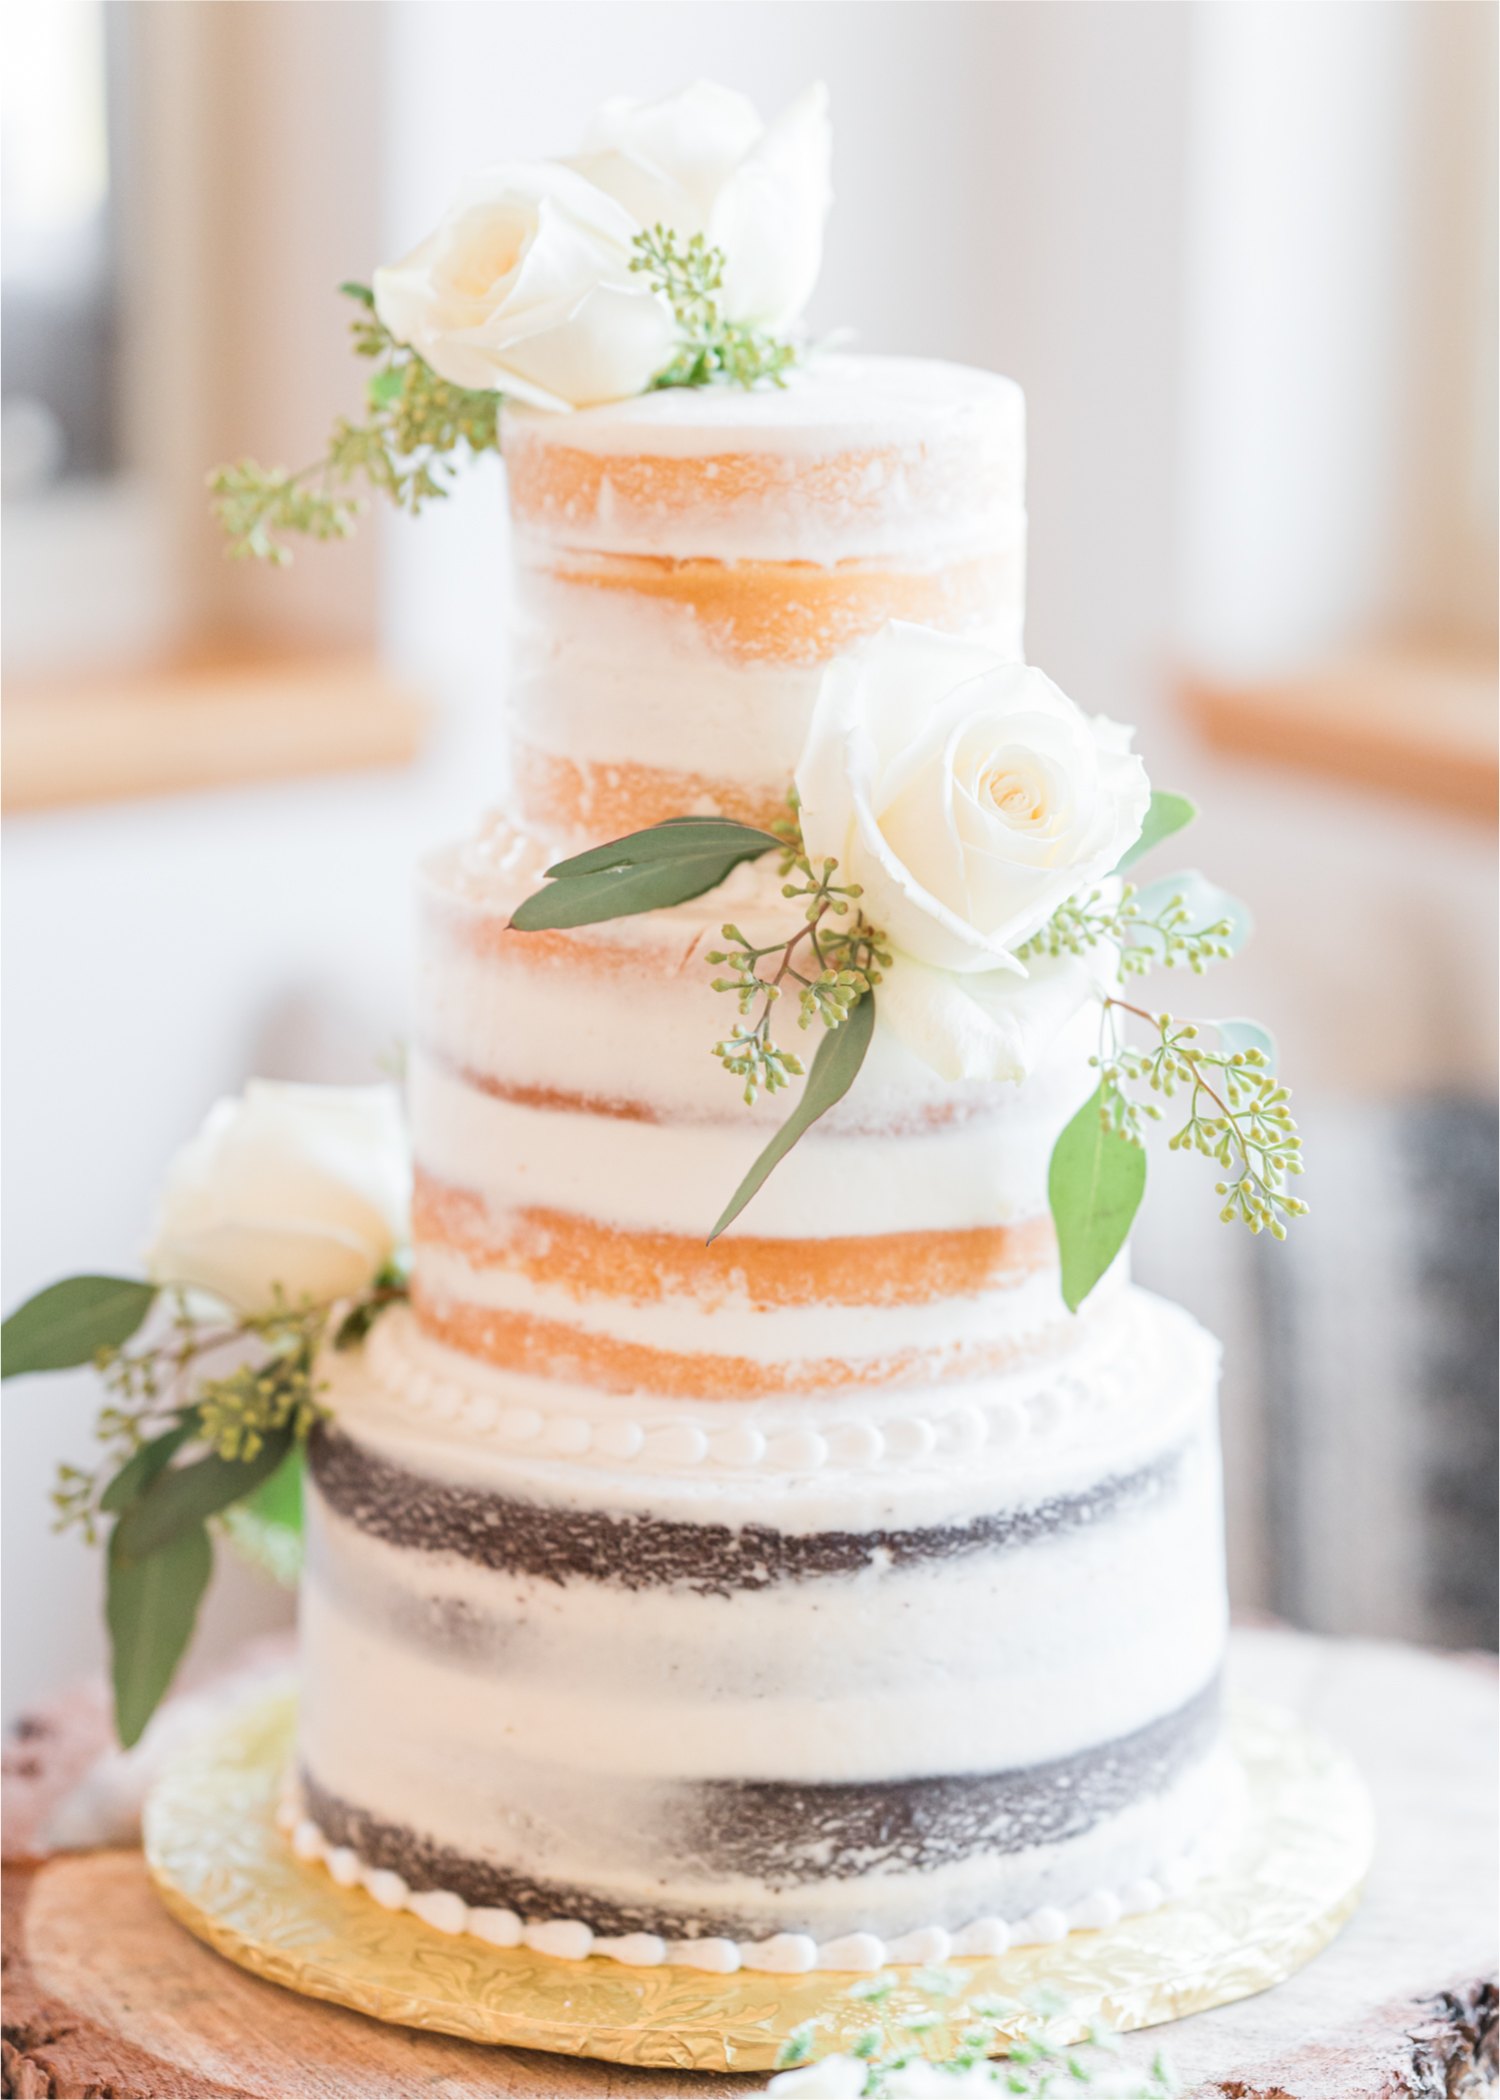 Autumn mountain wedding in Florence Colorado | Britni Girard Photography | Colorado Wedding Photo and Video Team | Mountainside Cabin for intimate wedding with rustic farm-tables and romantic details | 3 tiered rustic cake by Sugar Plum Cake Shoppe